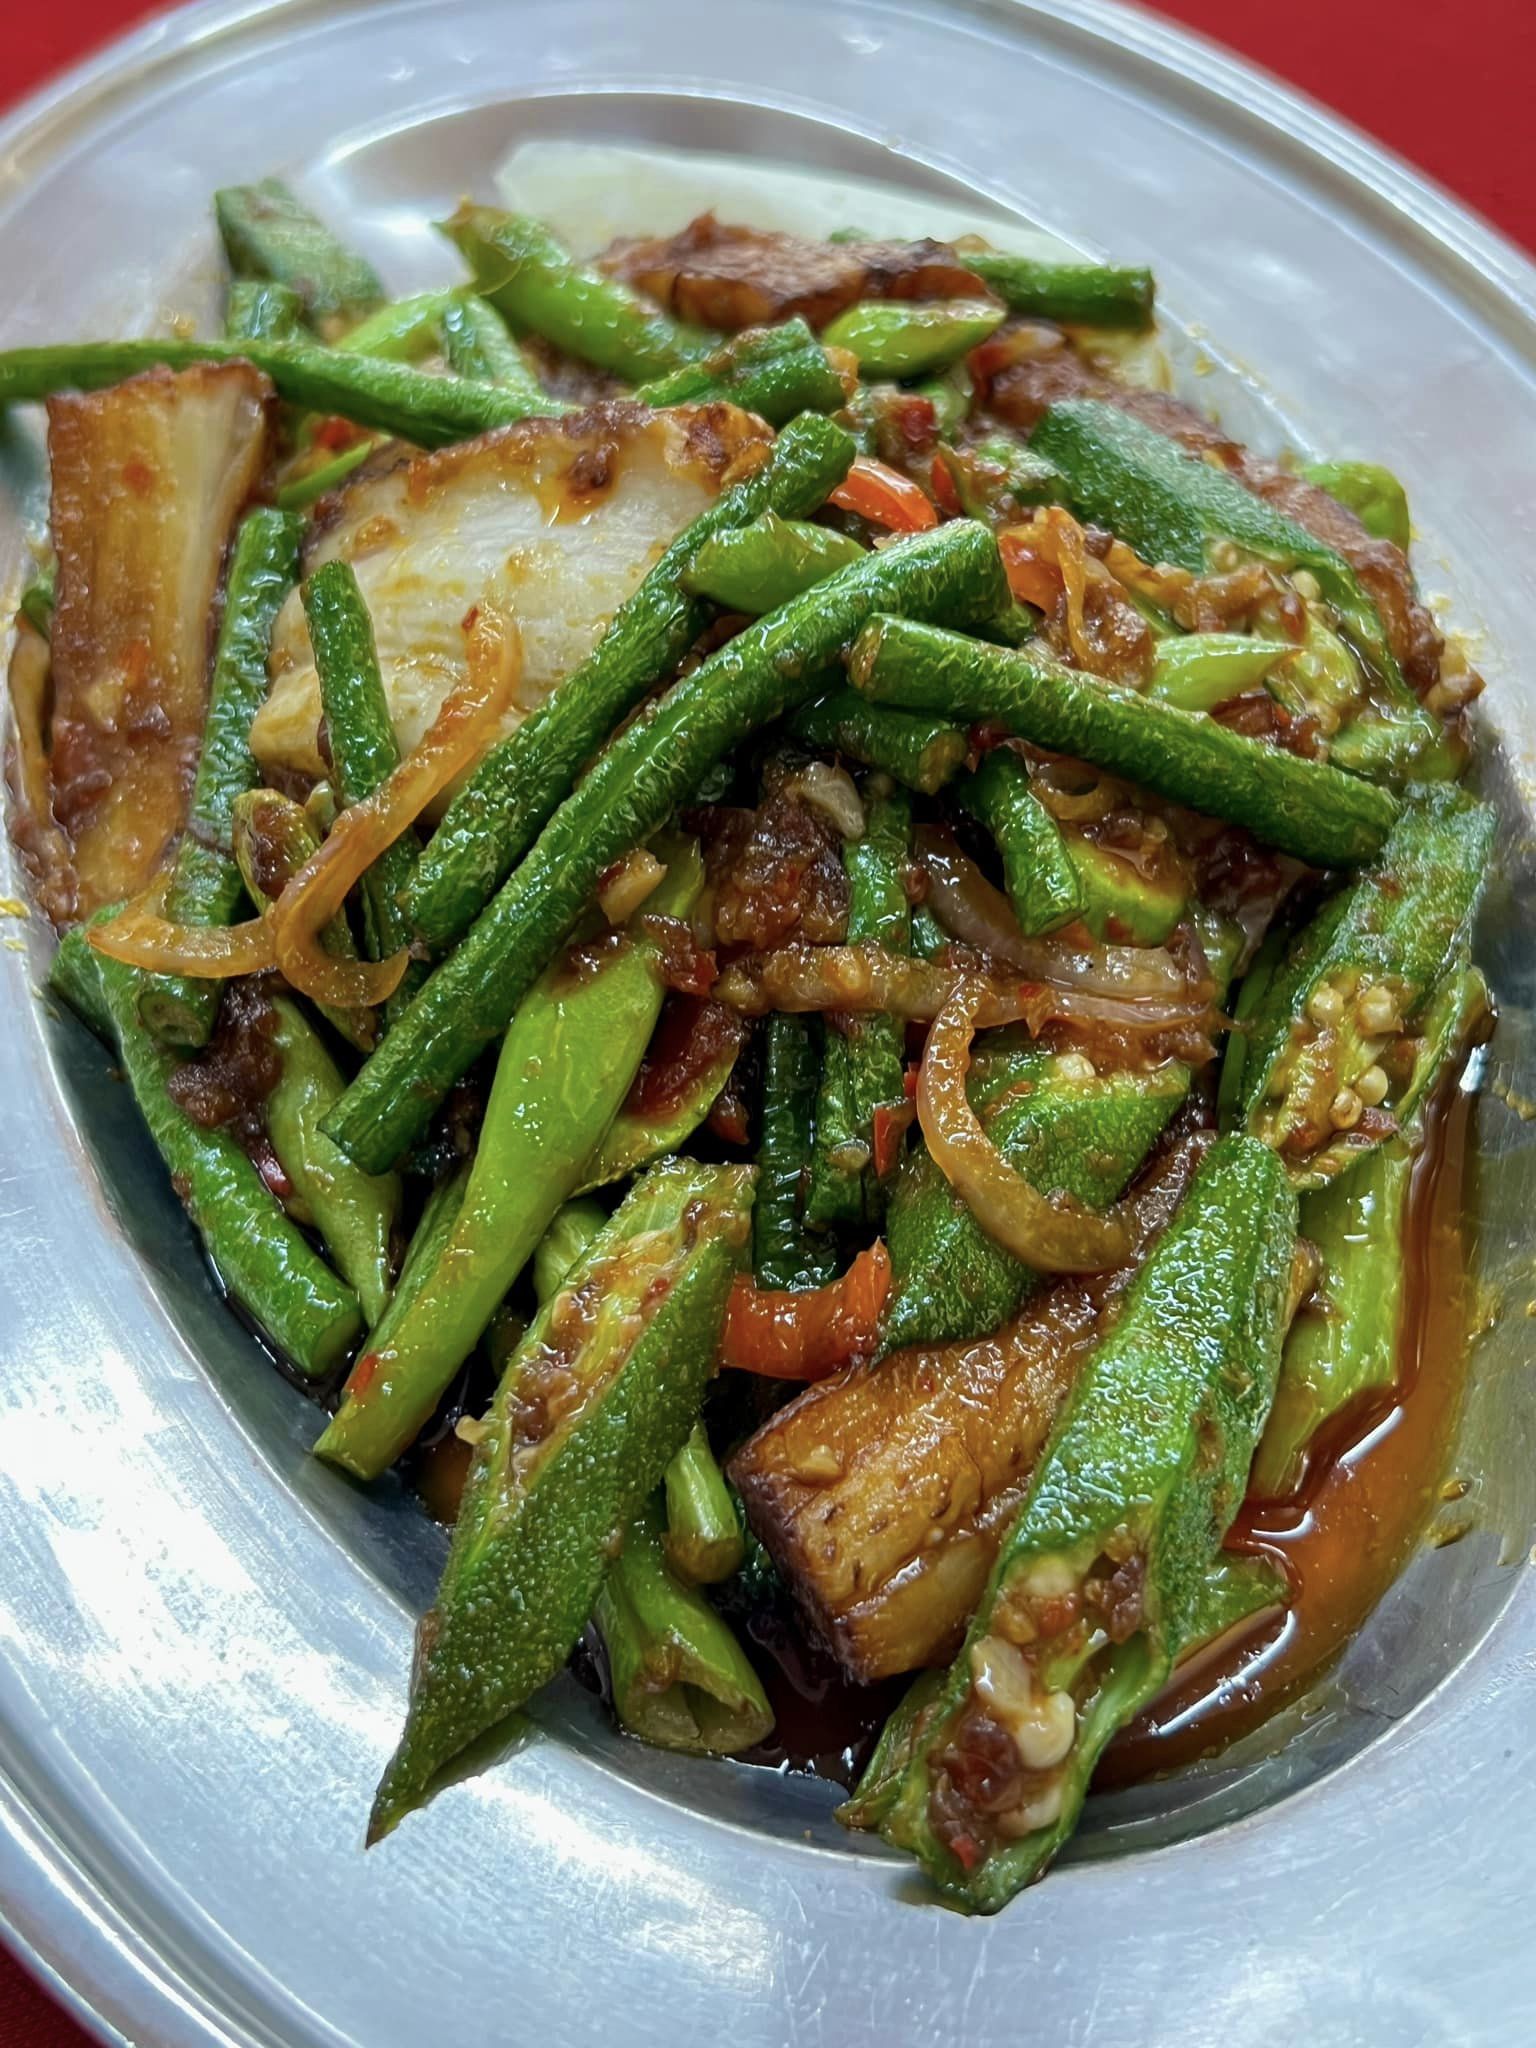 Thong Yew Seafood Restaurant